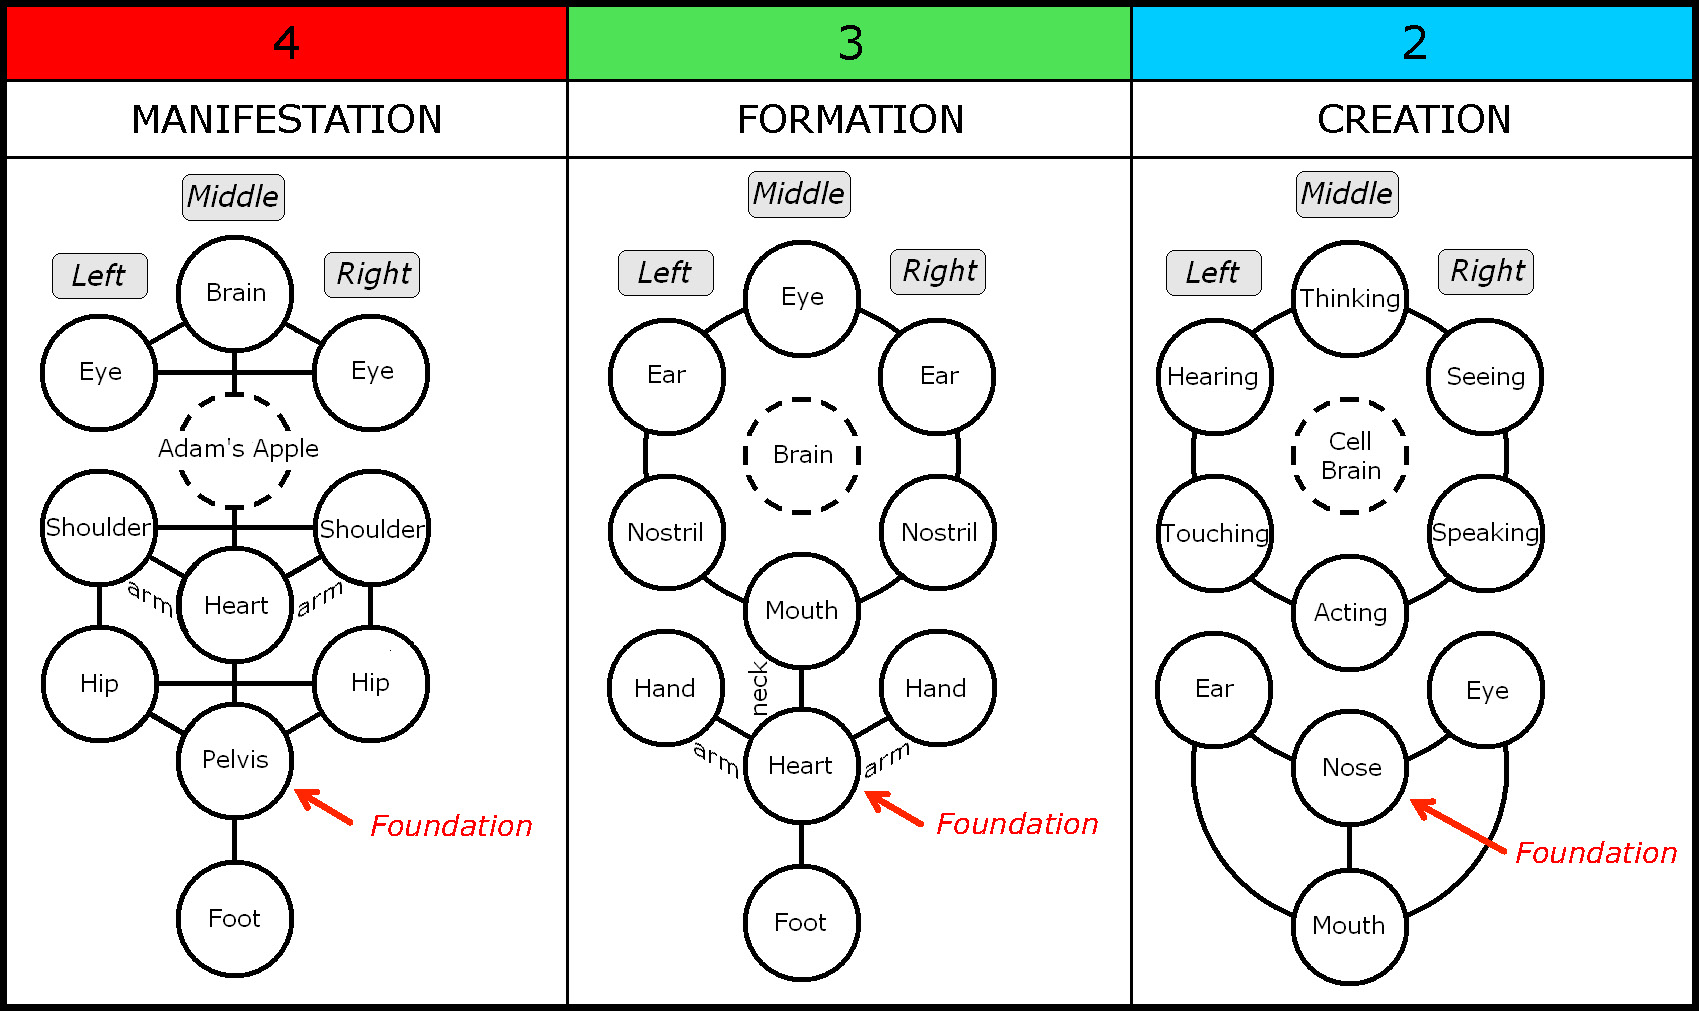 Chart-040-MFC-Foundation and Organs-002